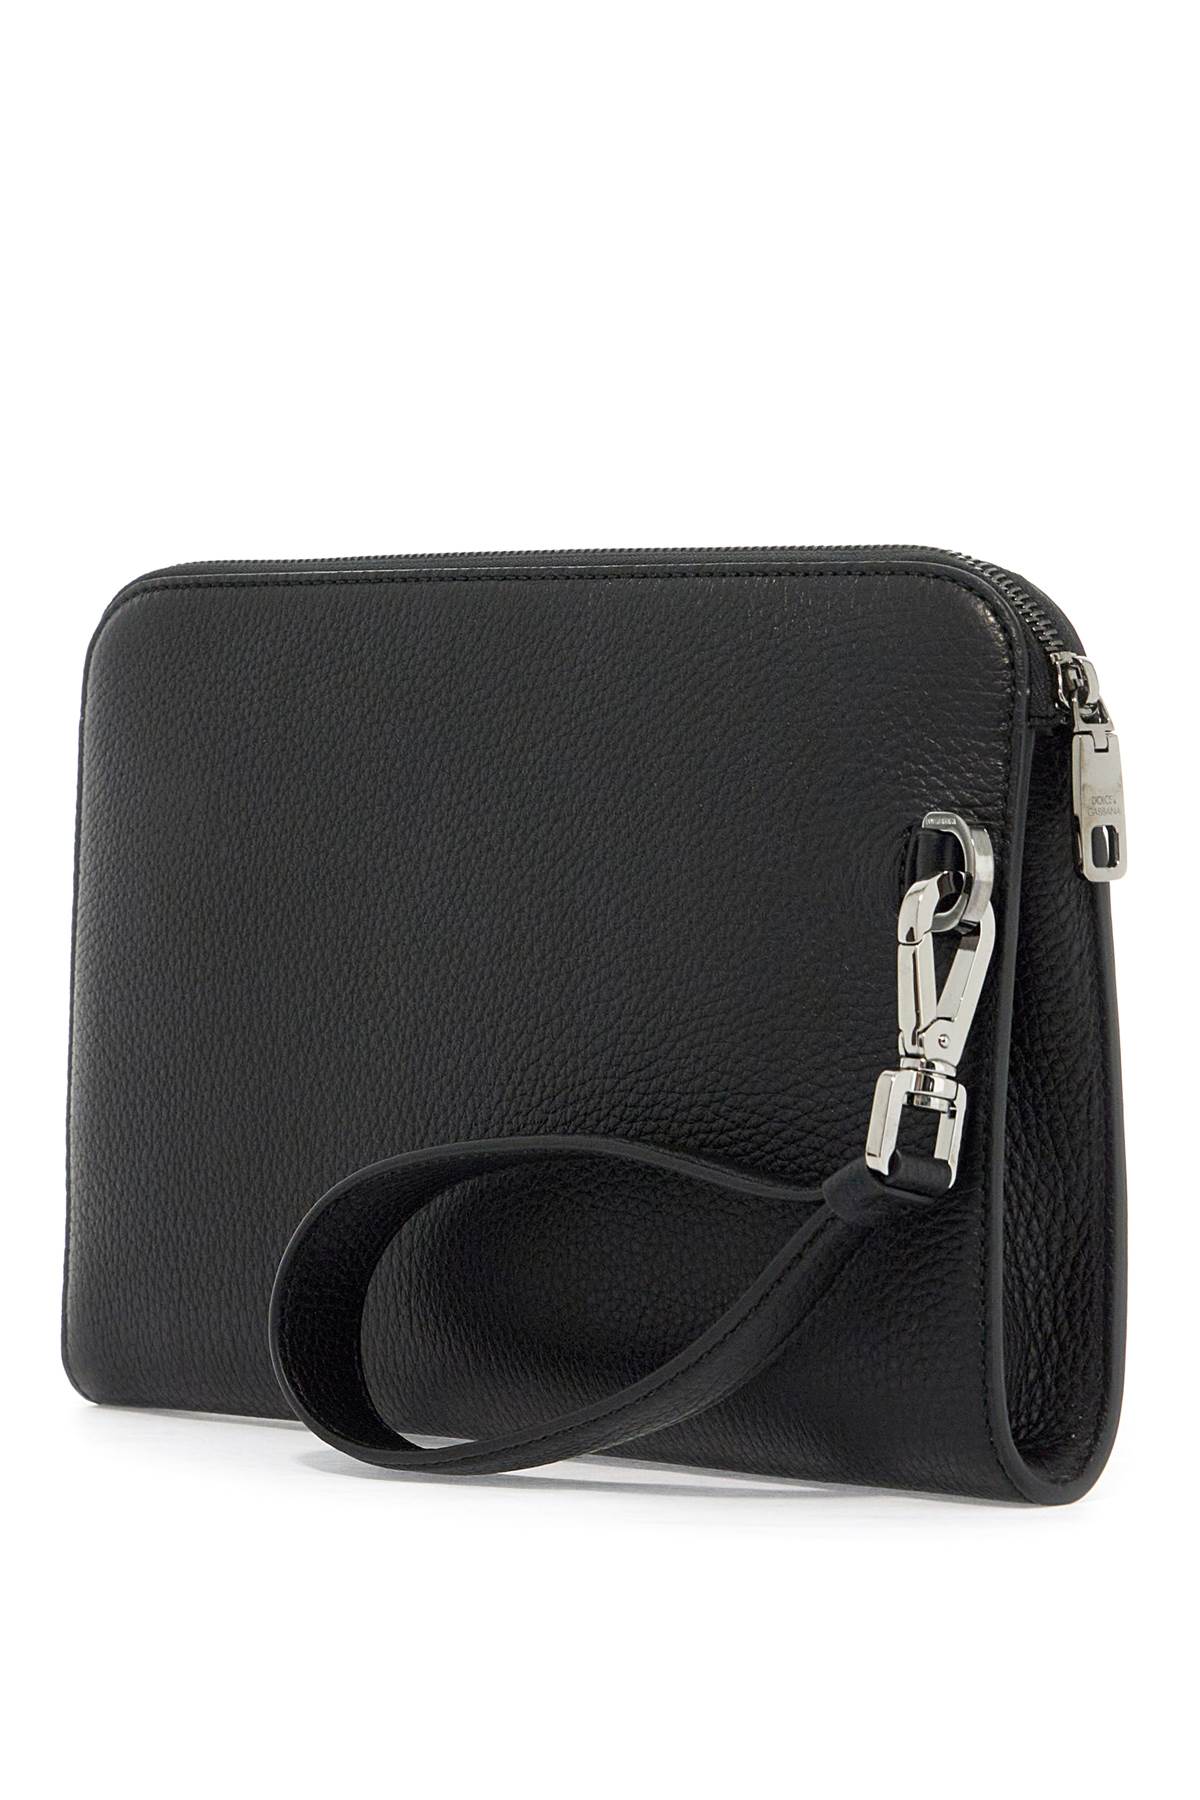 "embossed leather media pouch-1